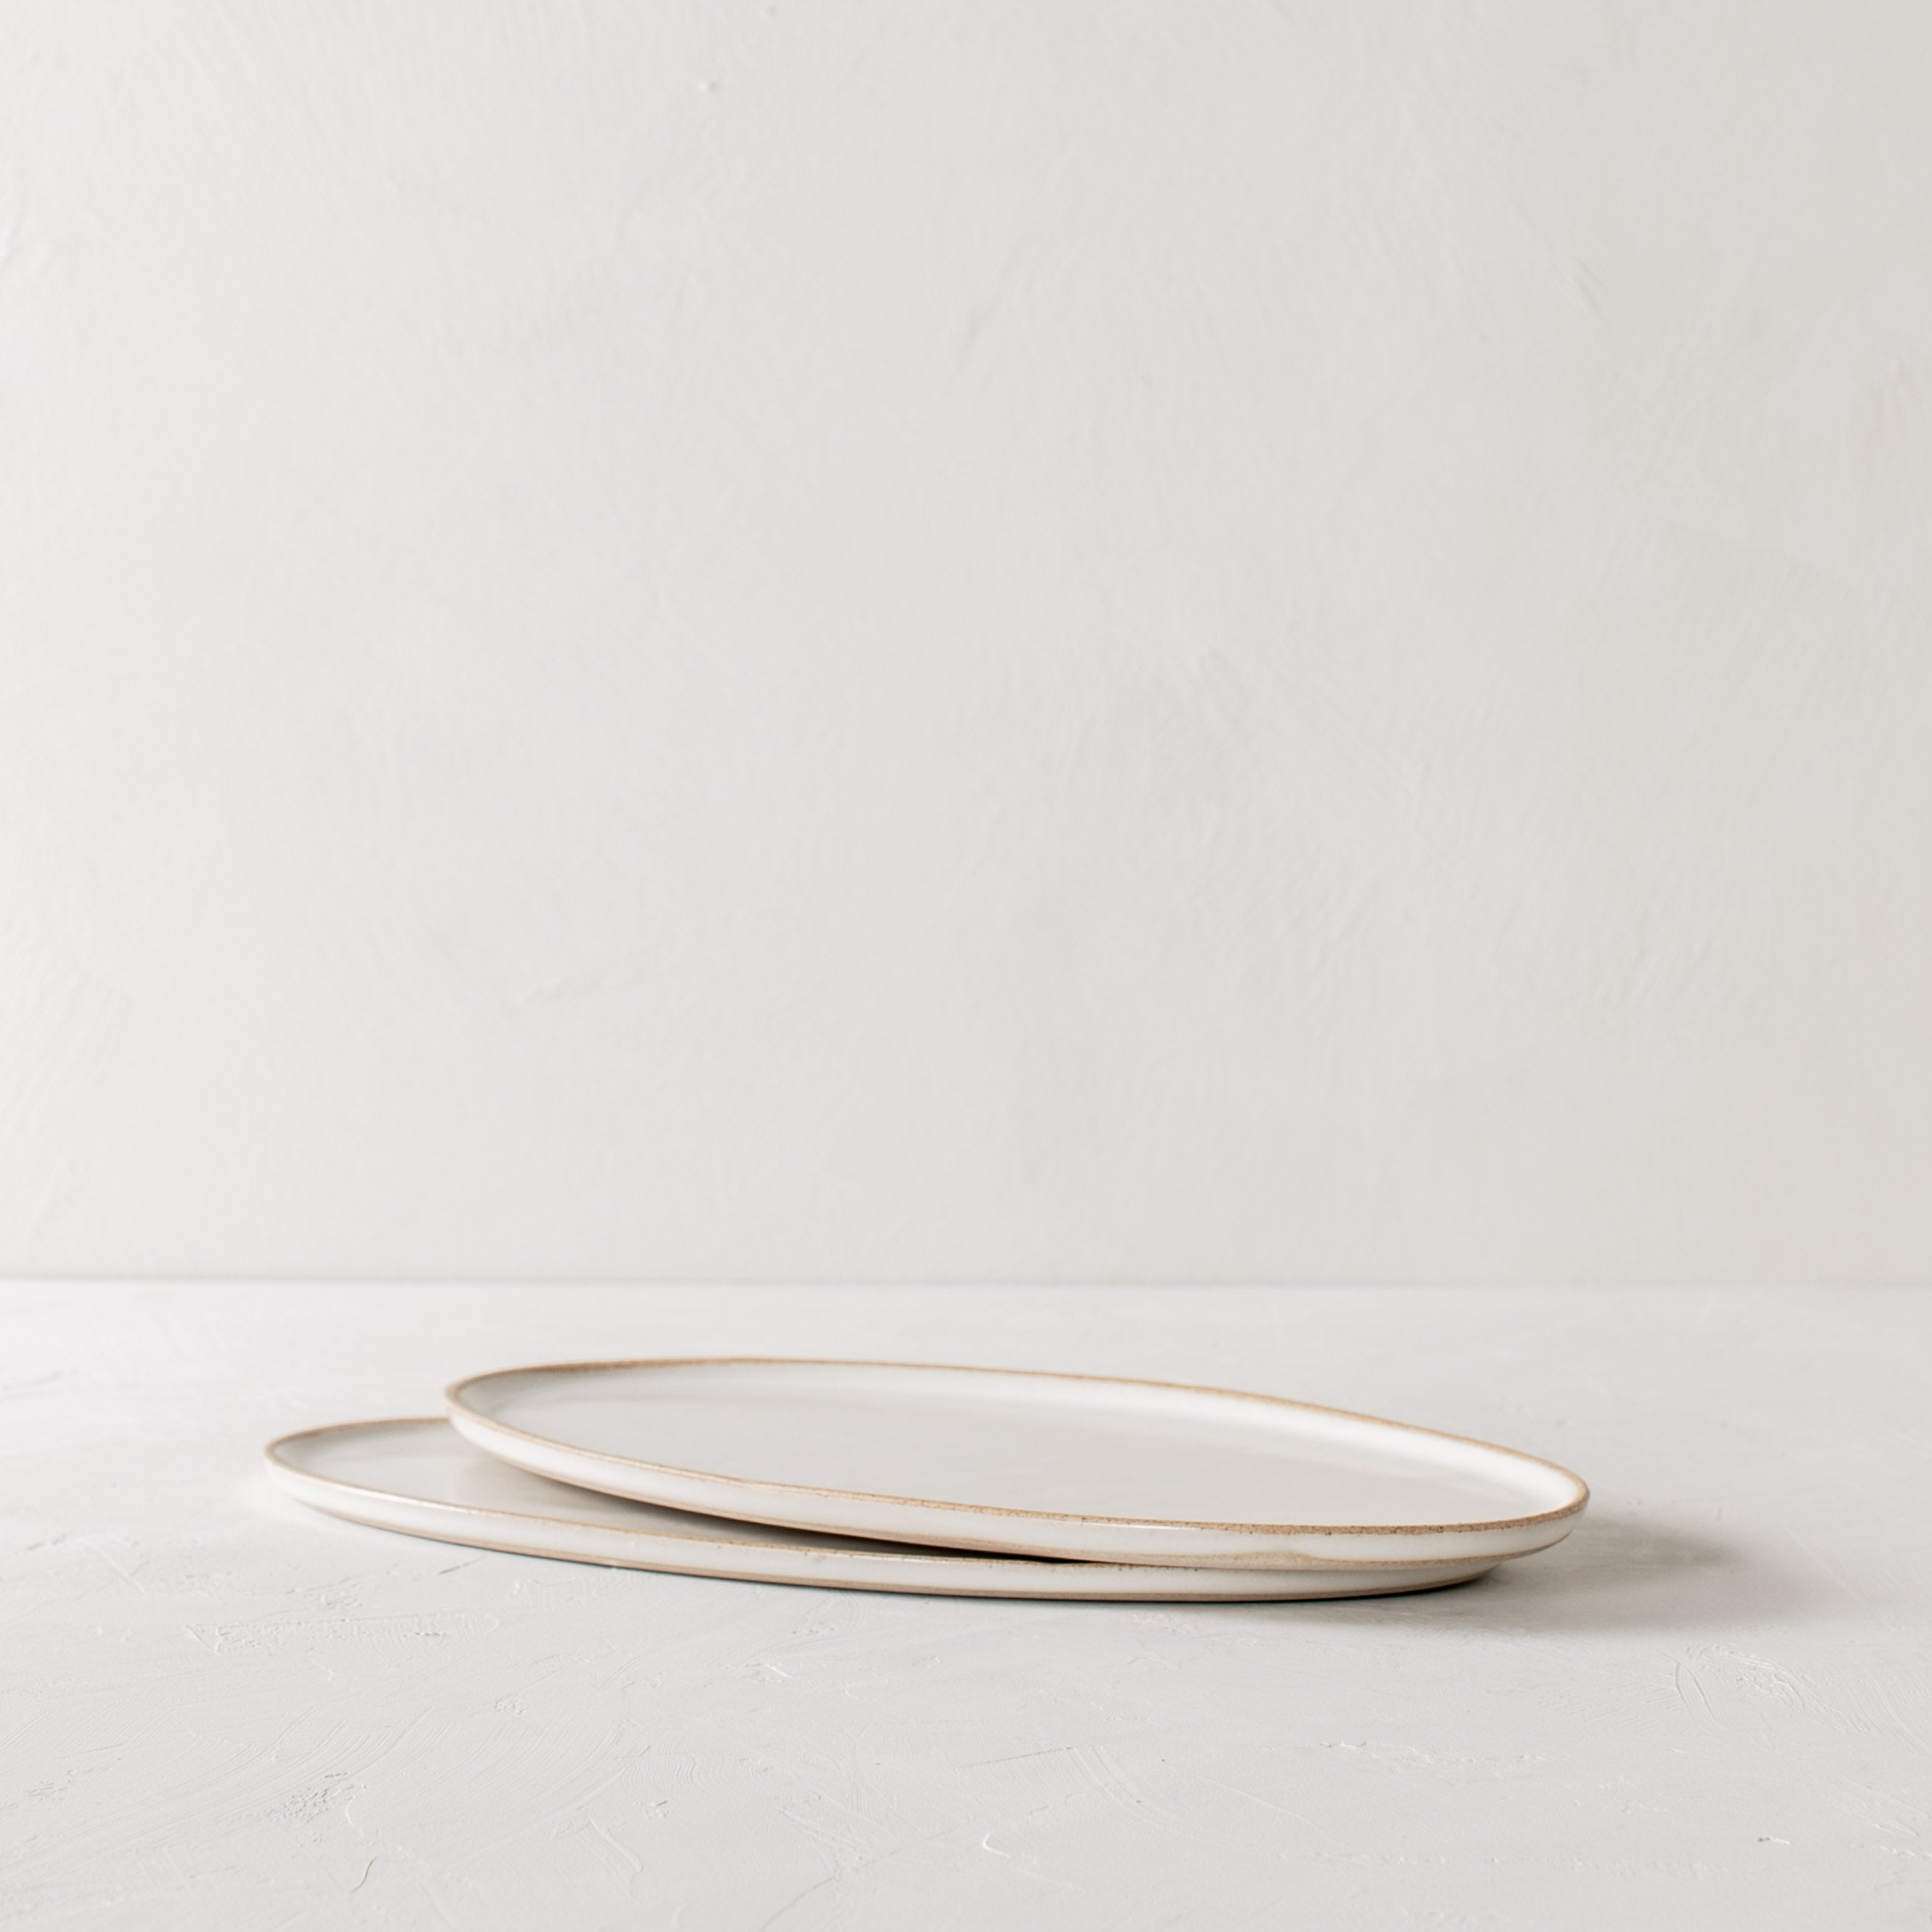 Two narrow vertical ceramic oval serving trays staggered and overlapping on a white textured table-top. Handmade ceramic serving tray, designed and sold by Convivial Production, Kansas City ceramics.